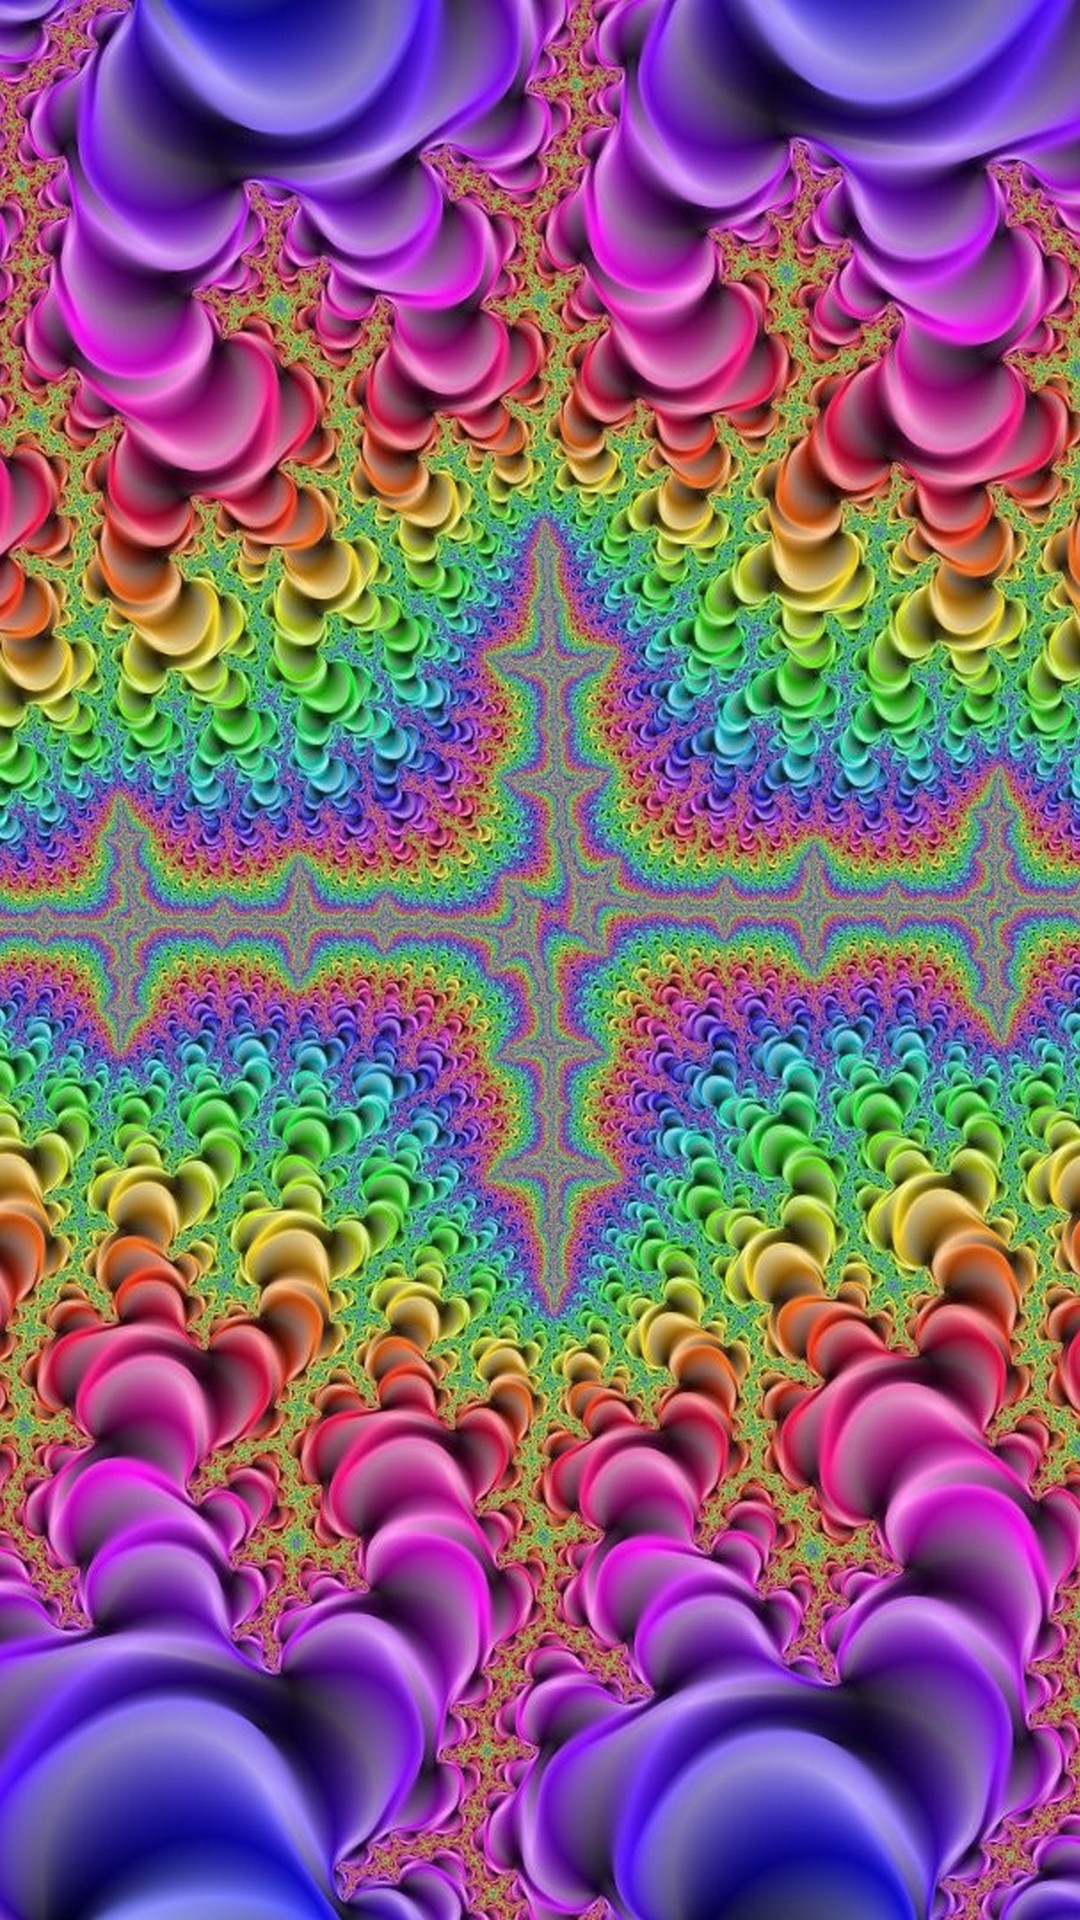 Psychedelic Wallpaper For Android With Hd Resolution - HD Wallpaper 